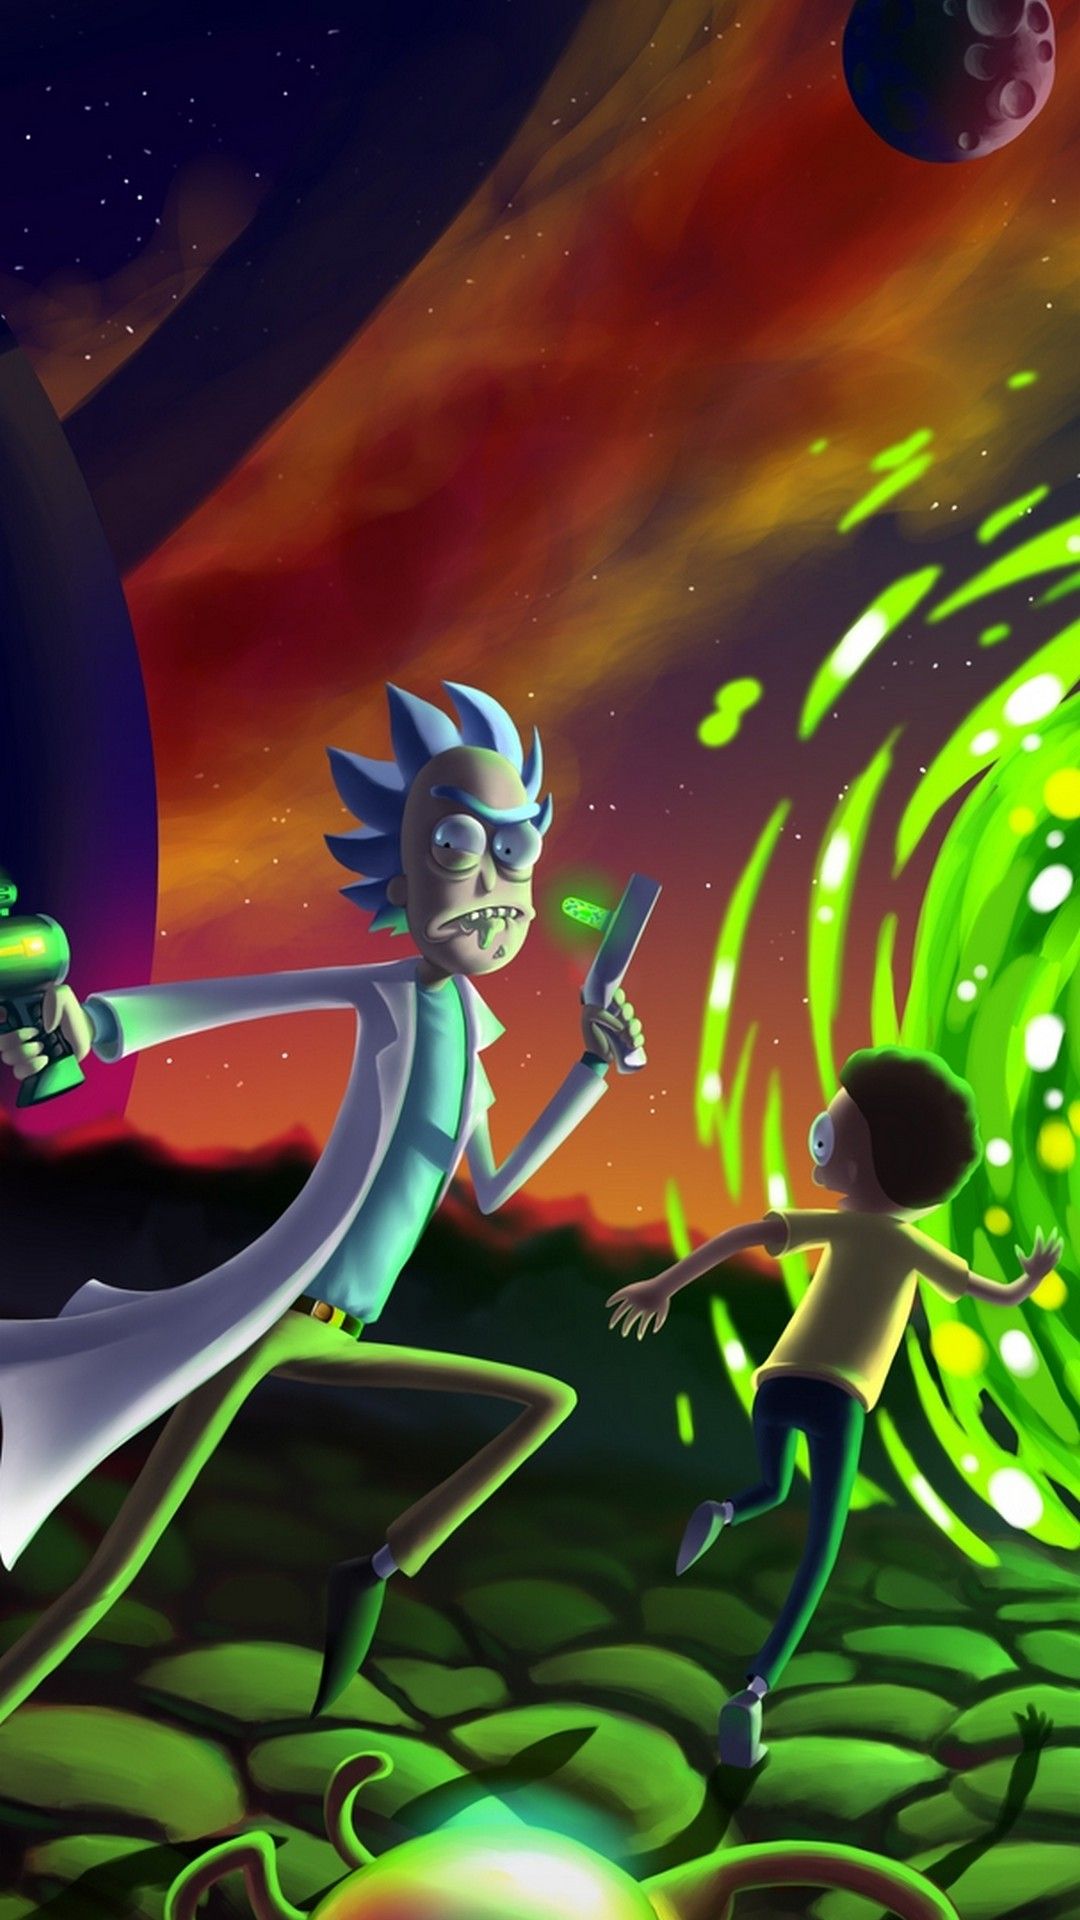 Rick and Morty Android Wallpaper Movie Poster Wallpaper HD